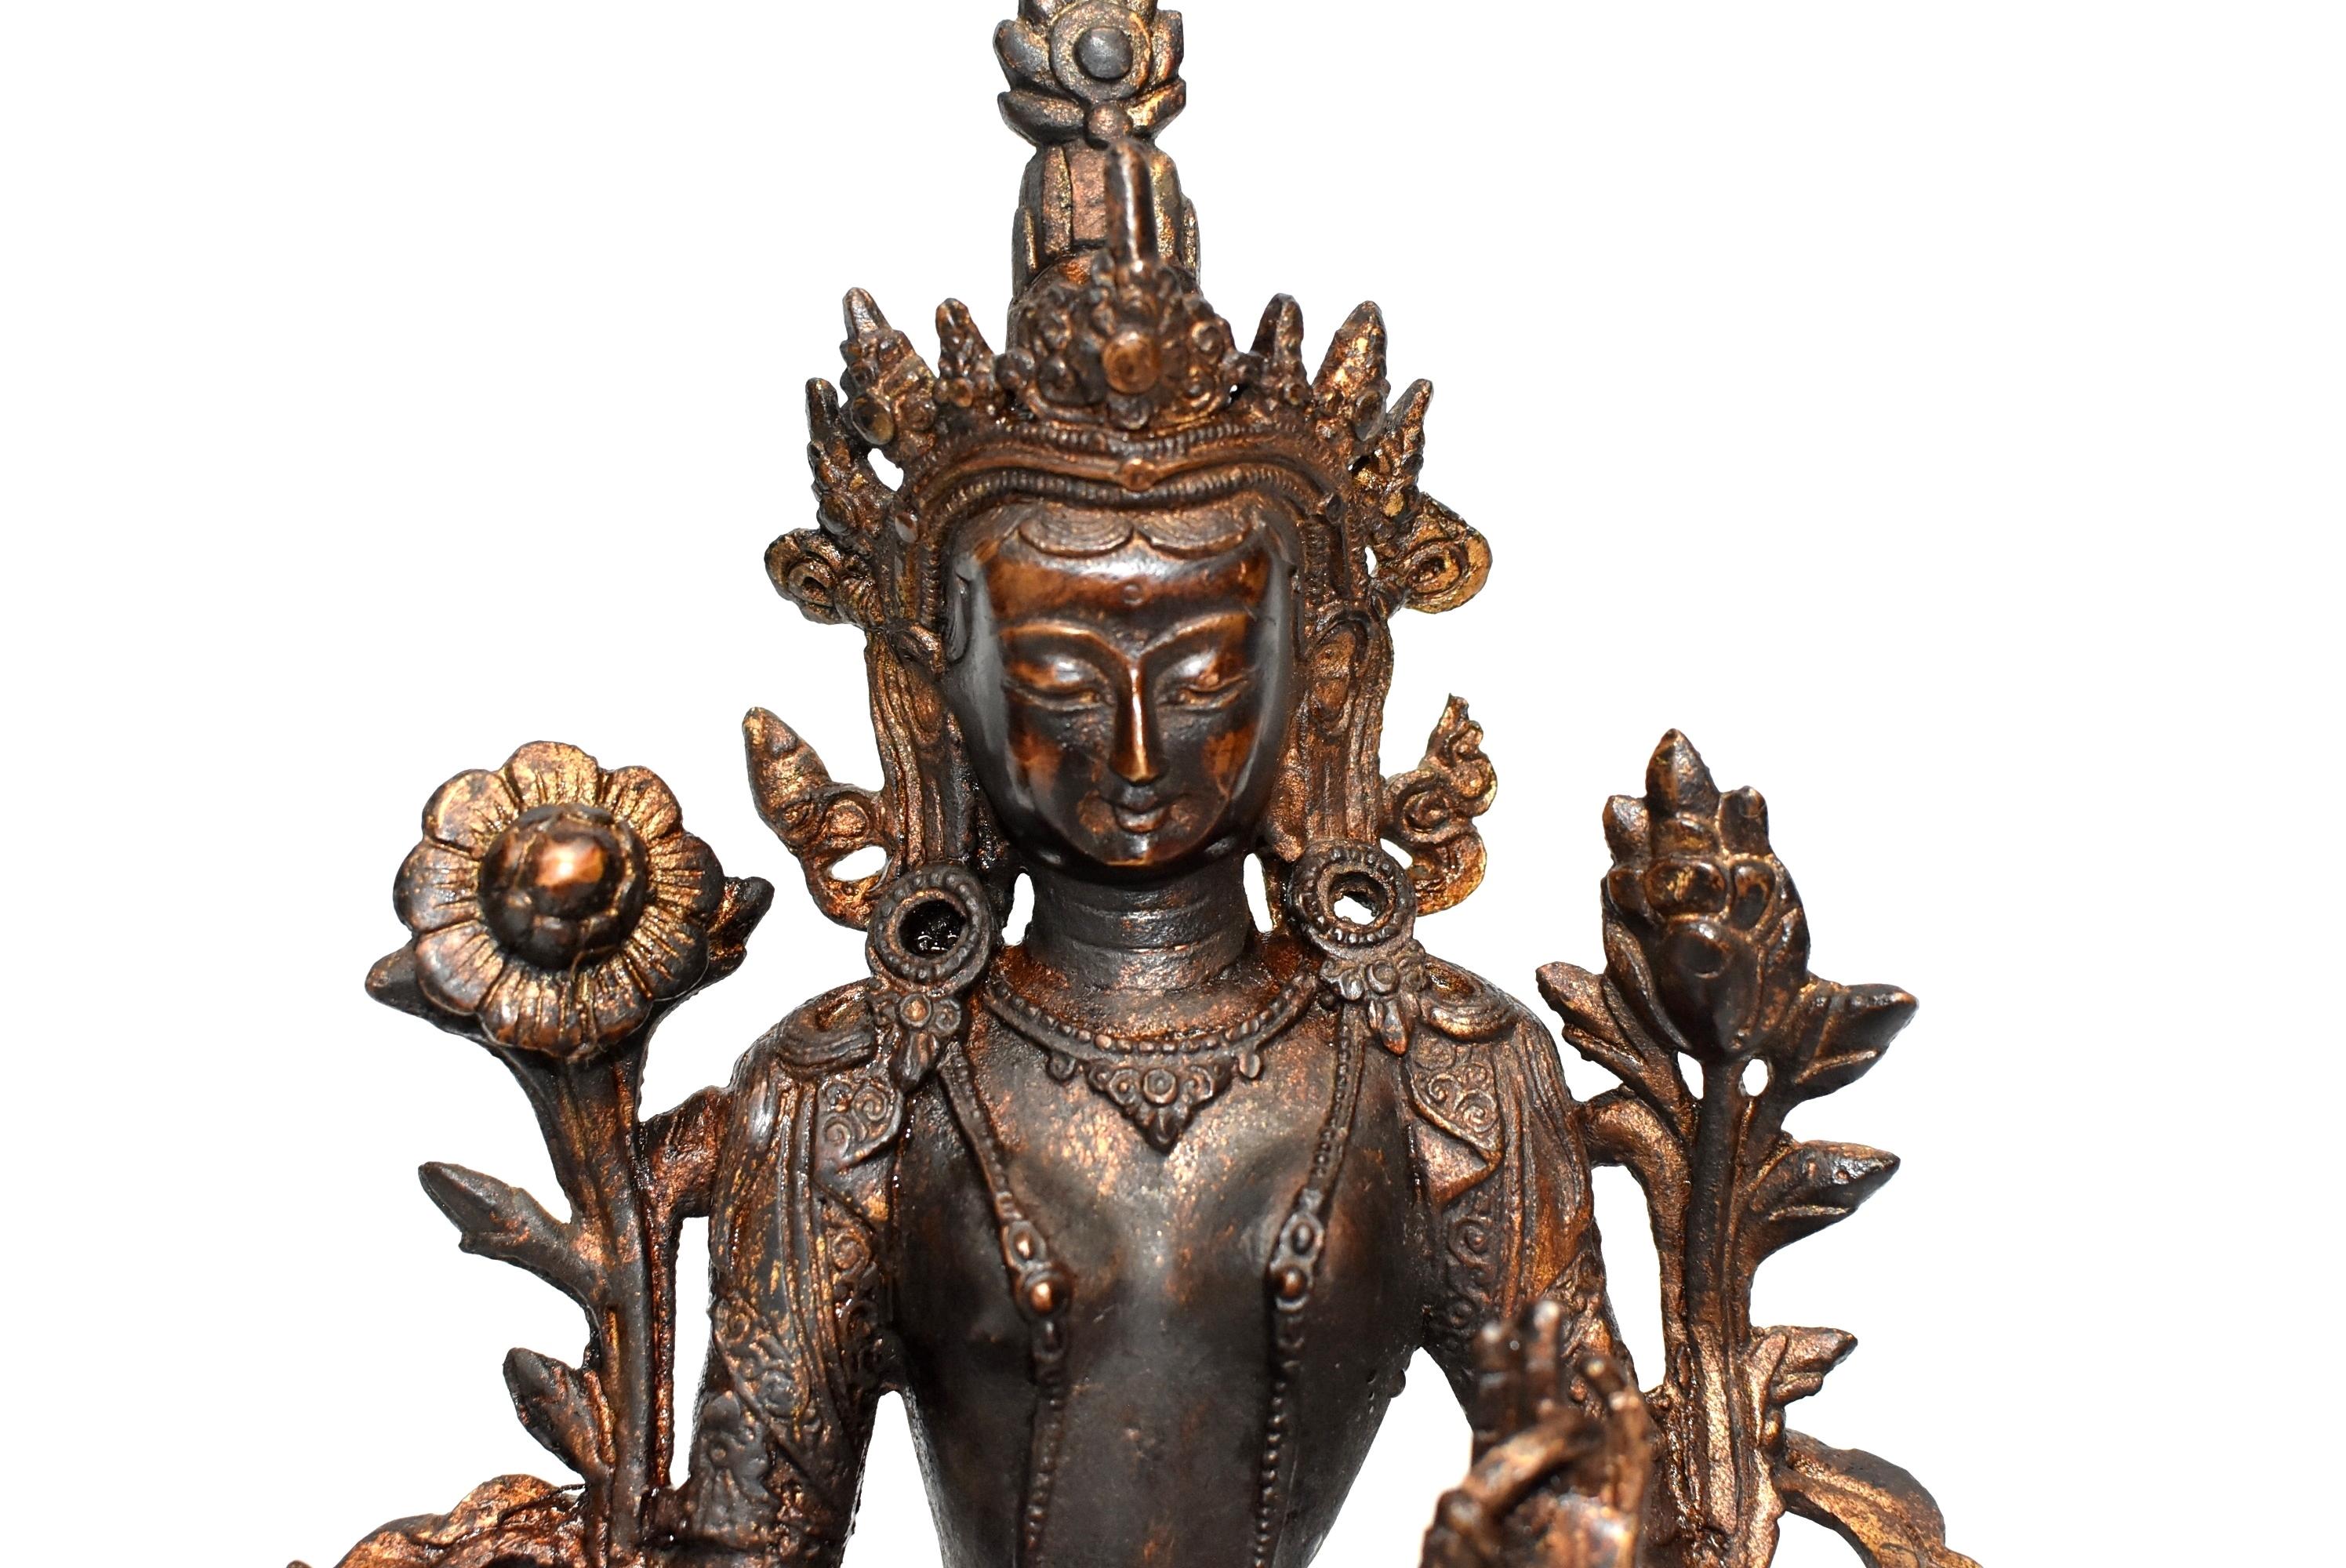 A beautiful seated figure of Avalokiteshvara, commonly known as the Green Tara. The bodhisattva is shown seated in lalitasana with the right foot supported on a lotus stem that projects from the front of the double-lotus base. The hands are held in